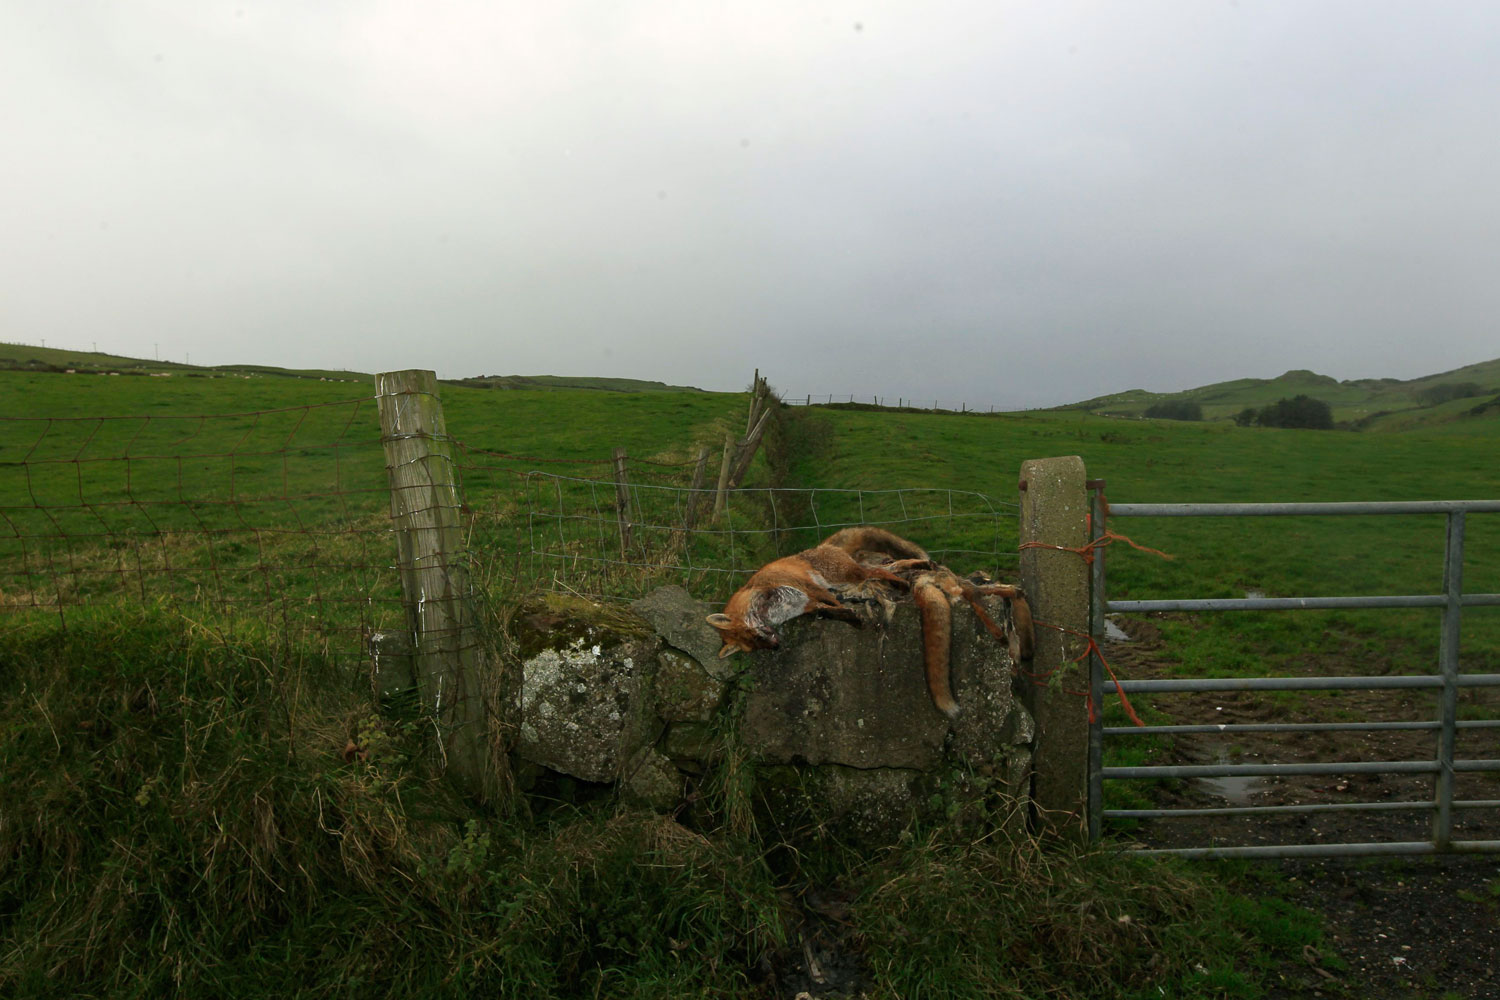 Image: Nov. 7, 2012. Dead foxes are seen placed on a dry stone wall near Fair Head in the Glens of Antrim, Northern Ireland. Foxes that have been culled during the night are left on display for the landowner to view.